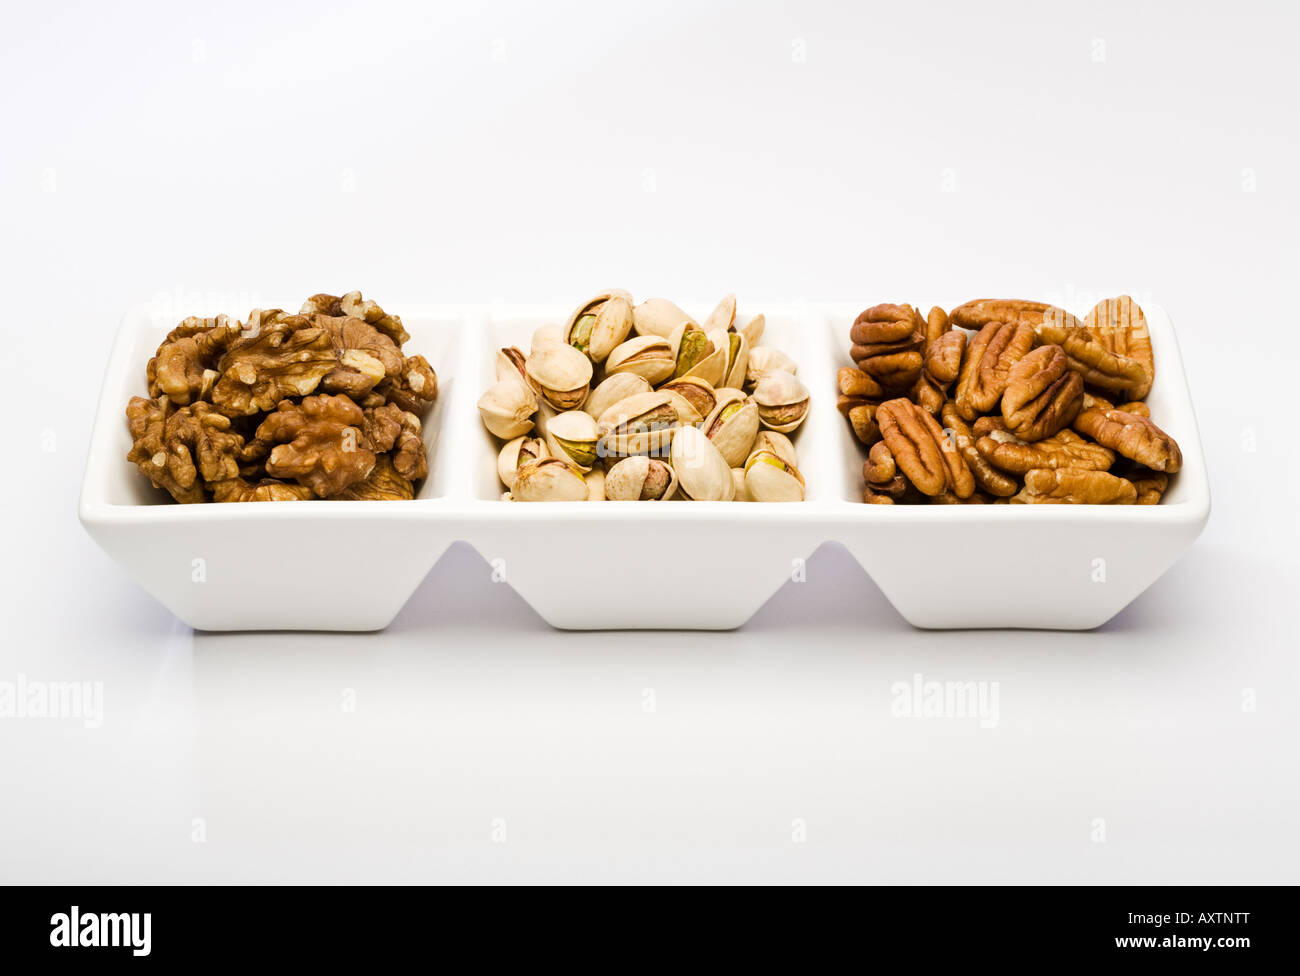 Three types of nut kernel Shelled Walnuts Pistachios and Pecans Stock Photo